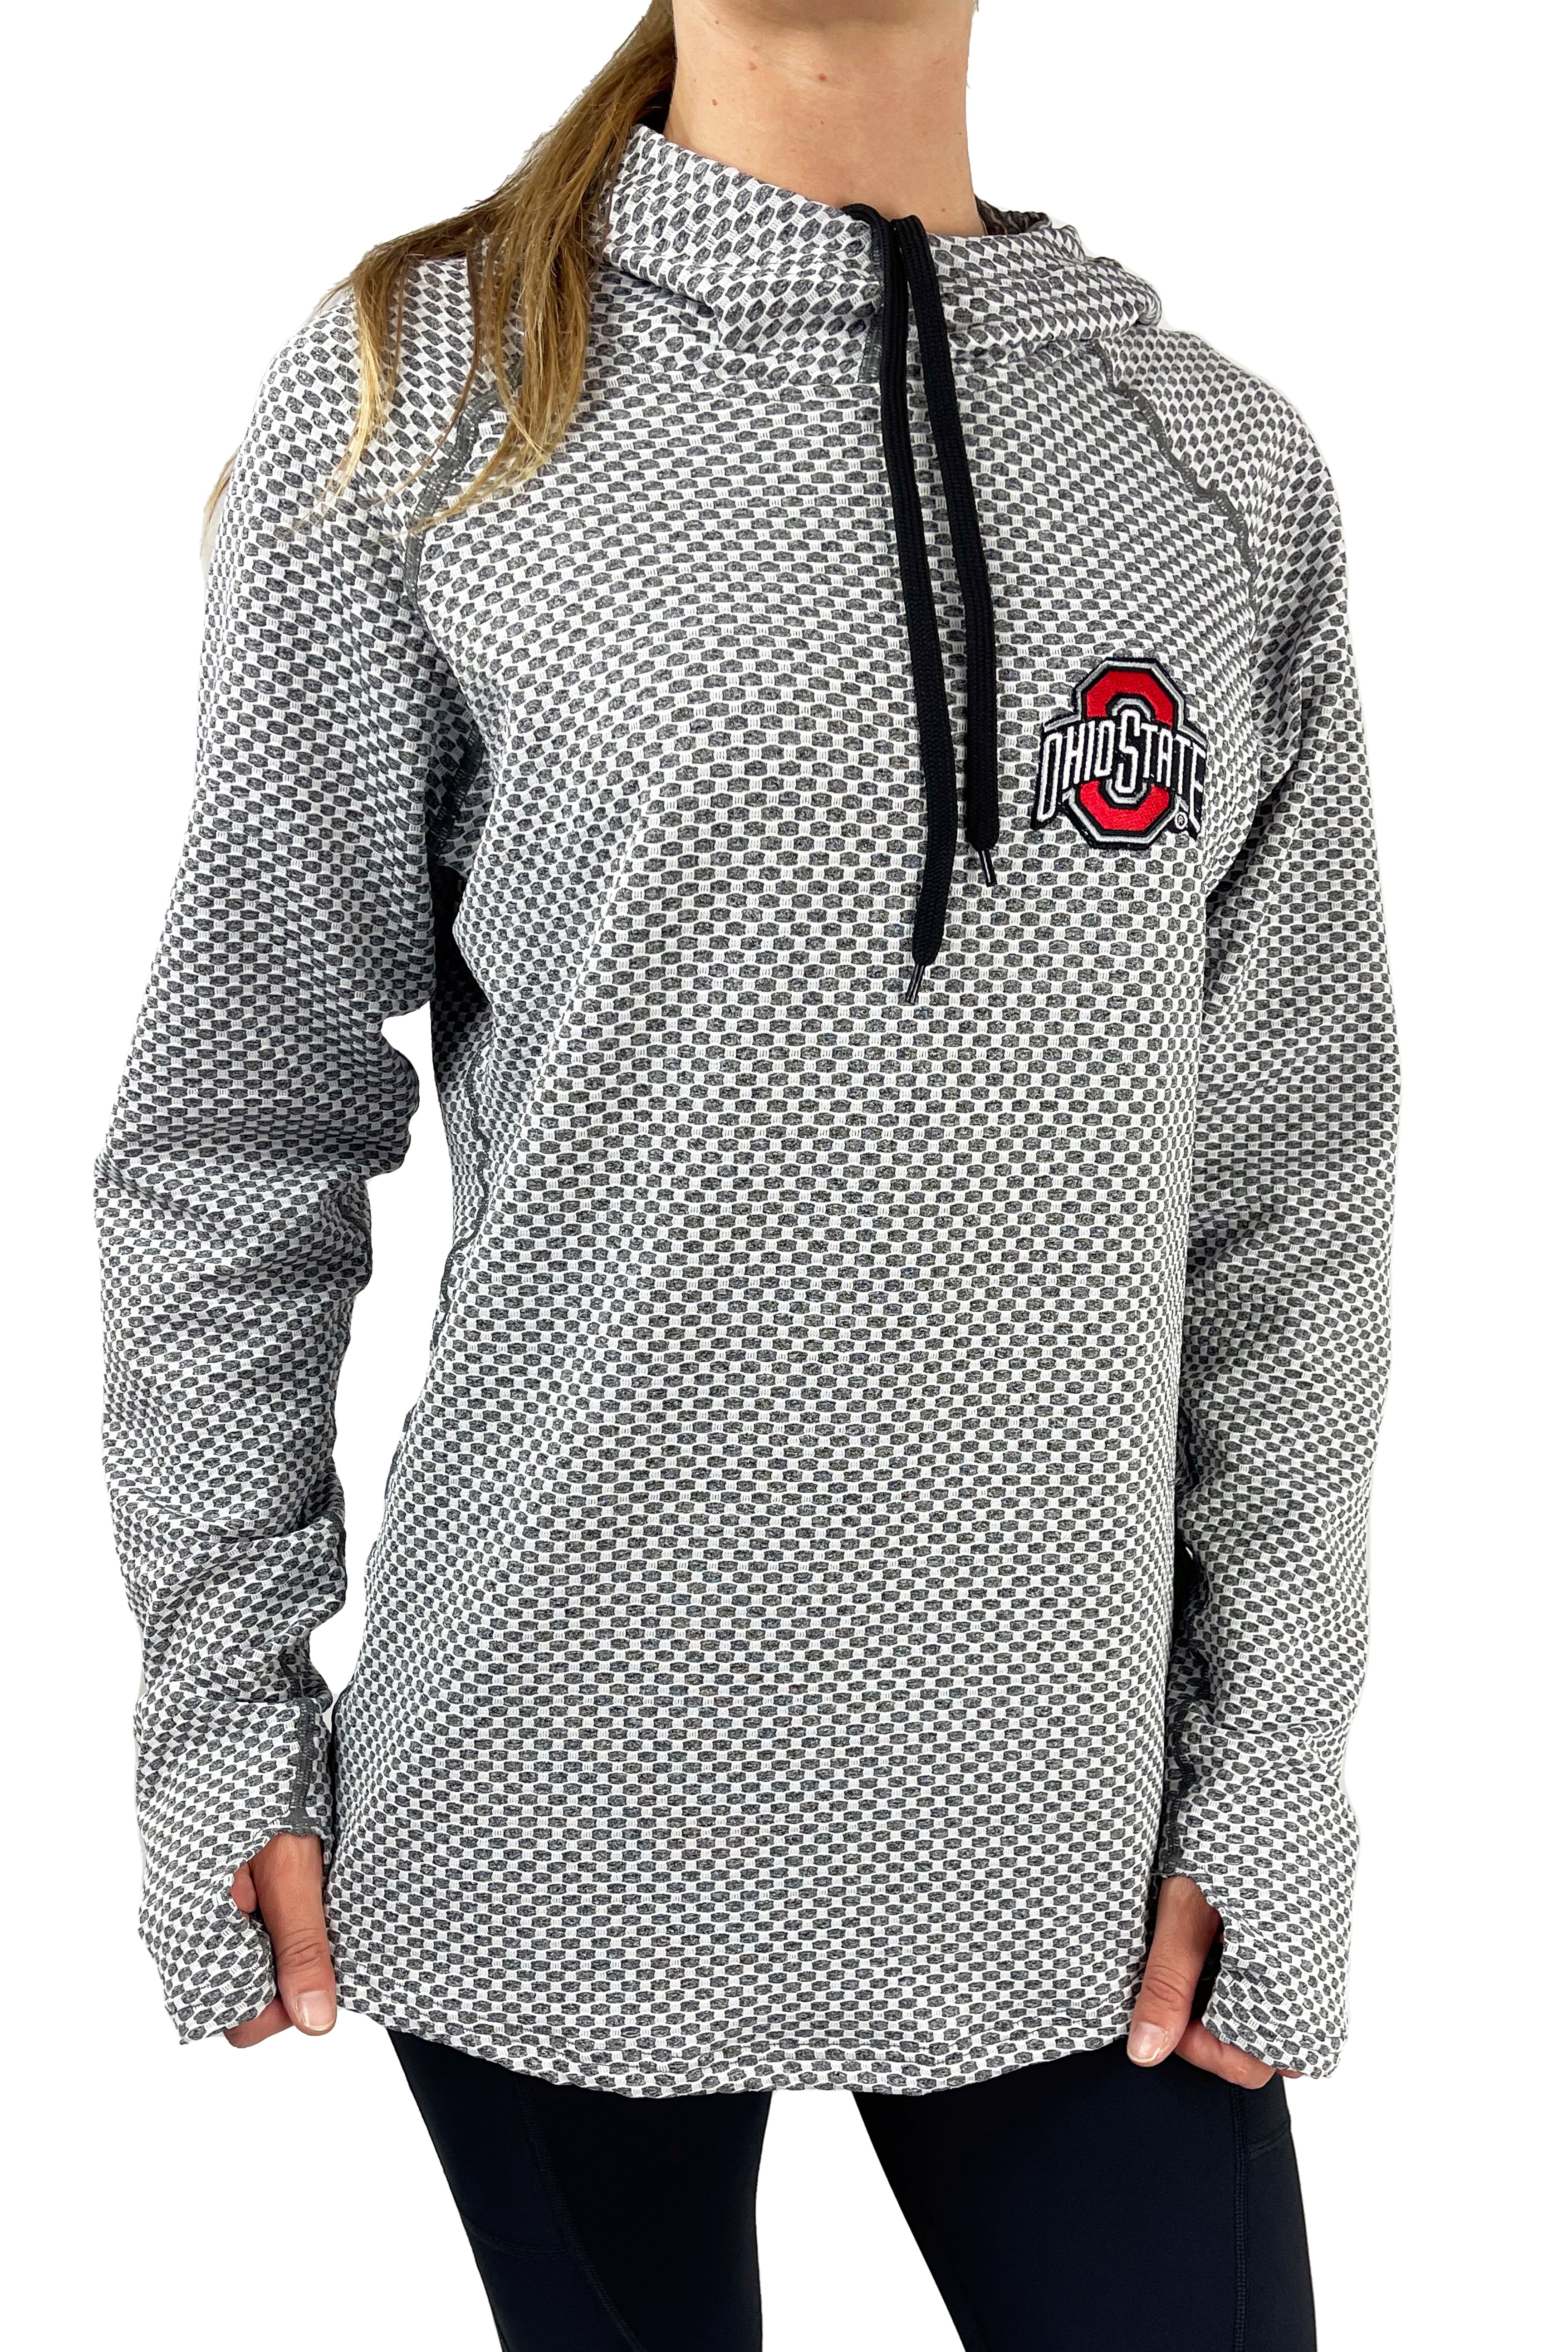 The Ohio State University Honeycomb Textured Hoodie (Two Colors Available)